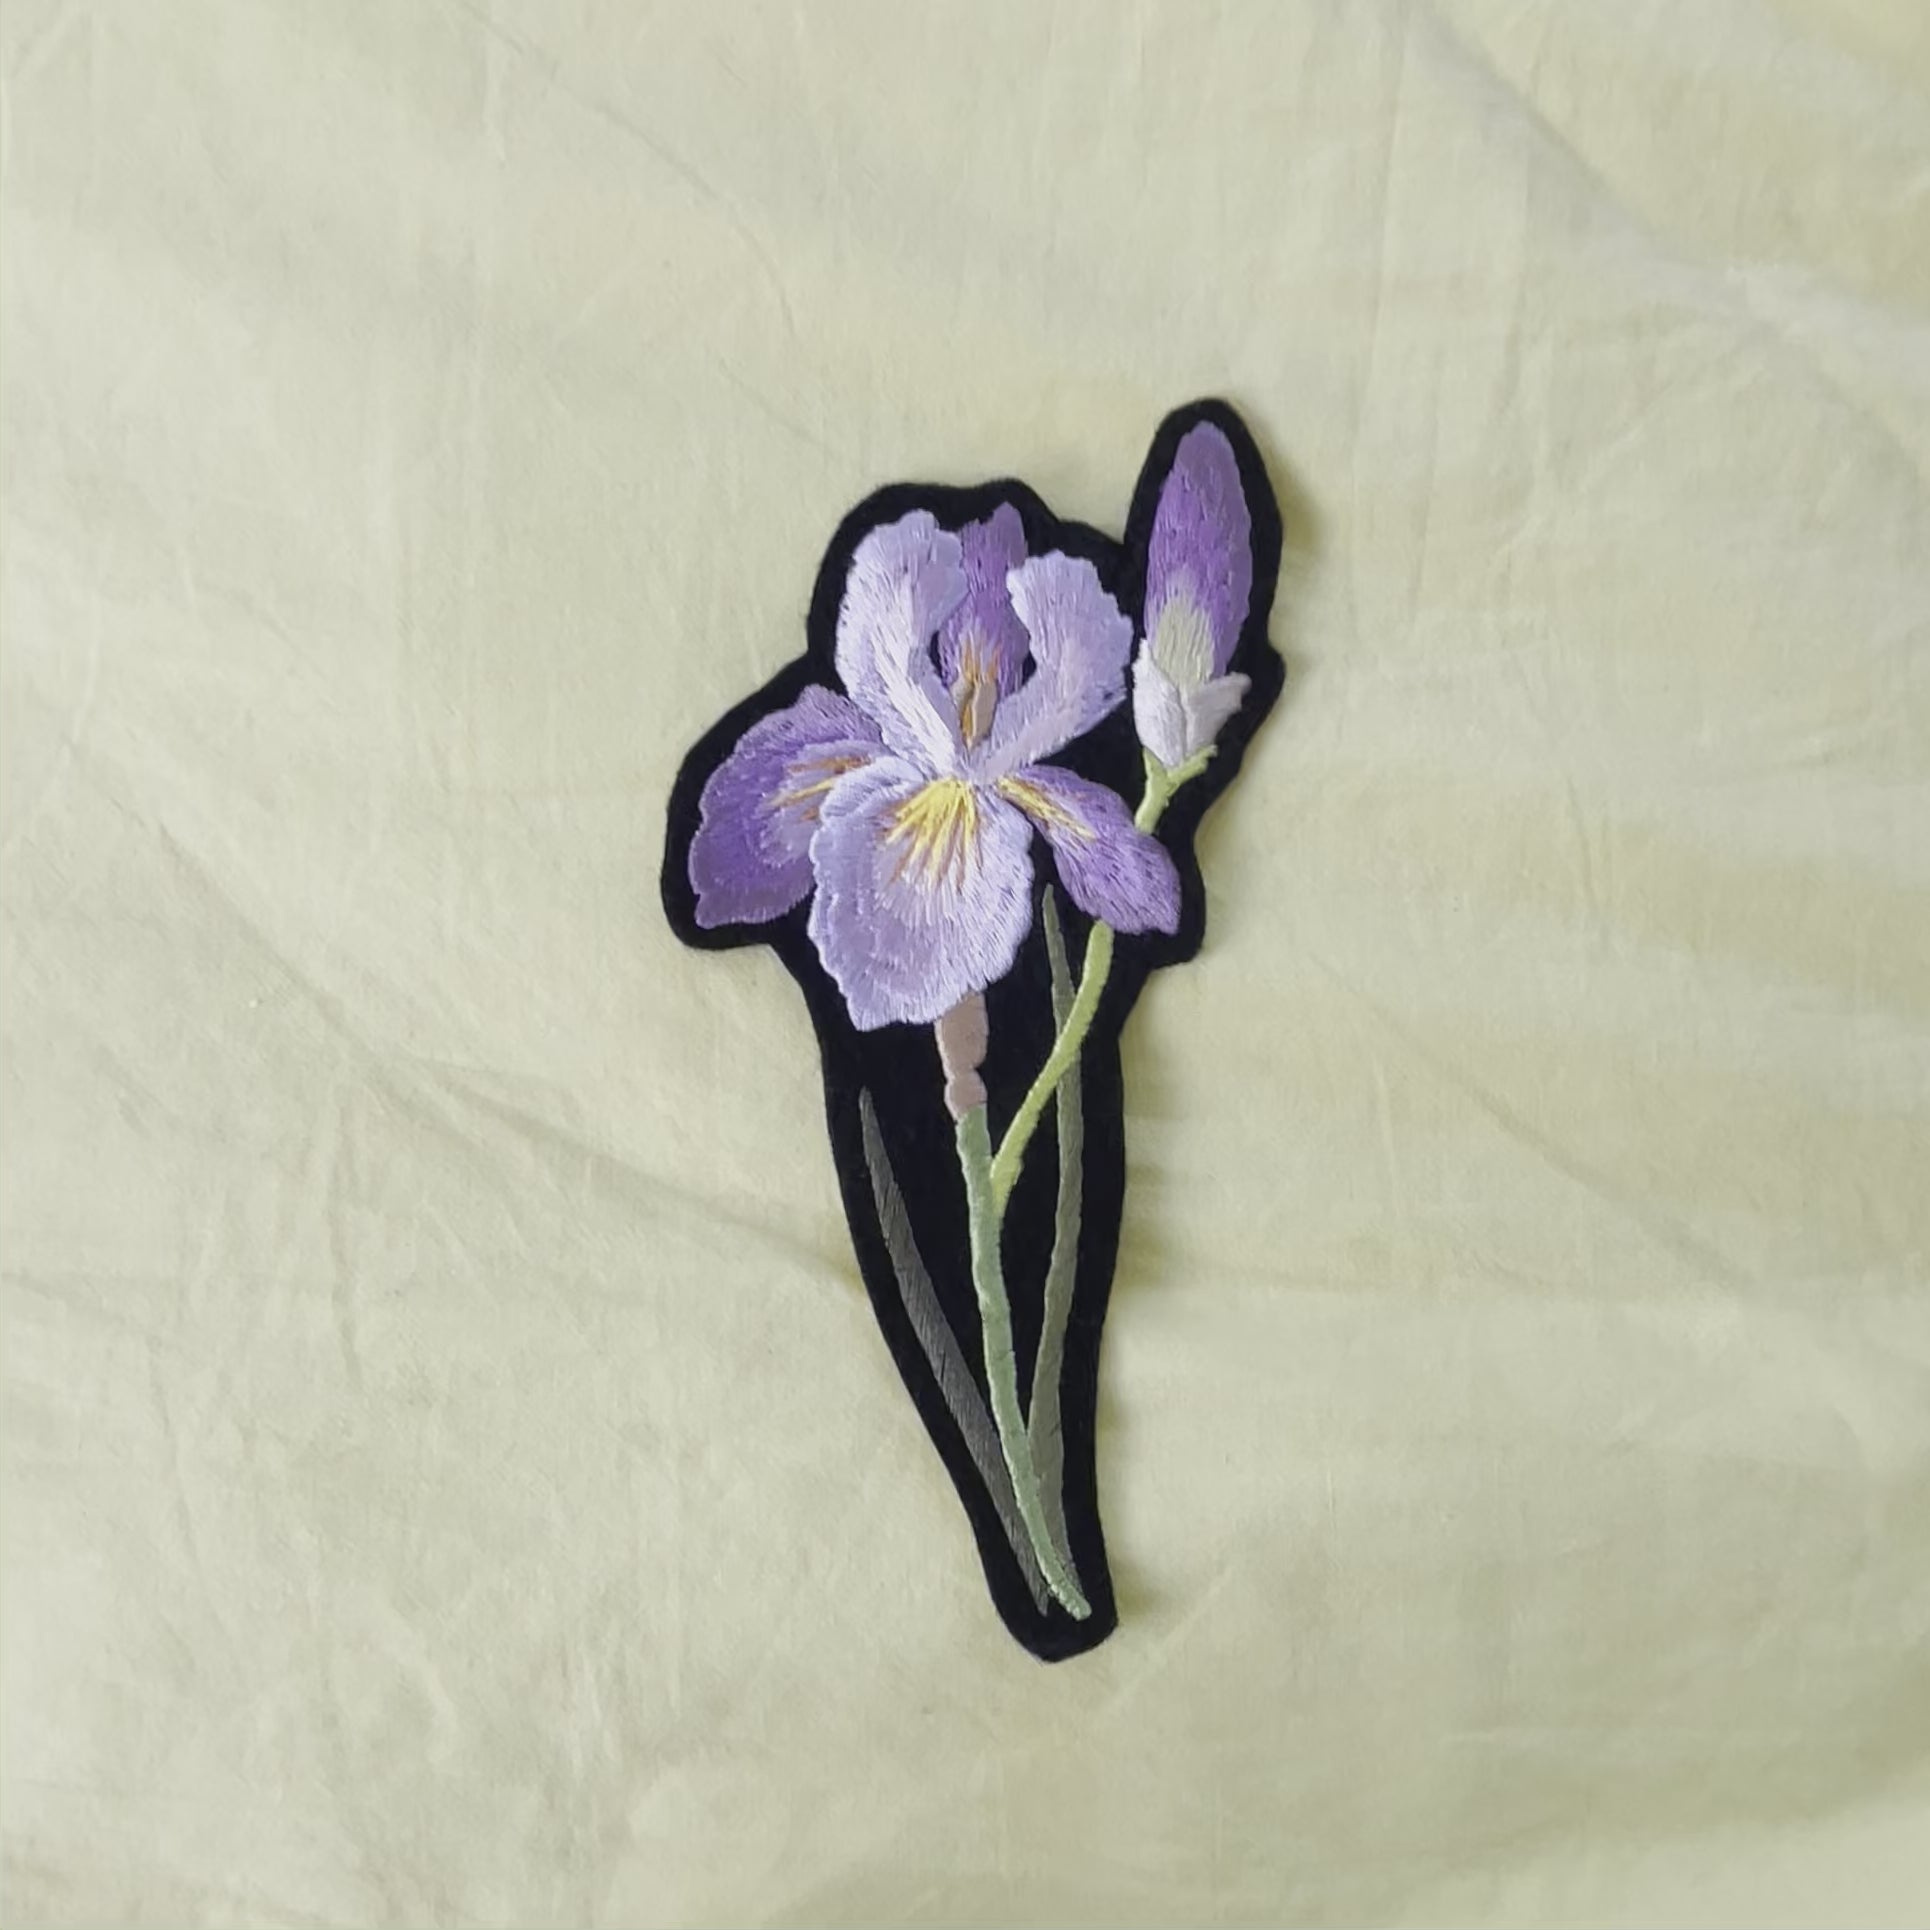 Video close-up of someone's hand holding the embroidered iris patch and bringing it closer to the camera